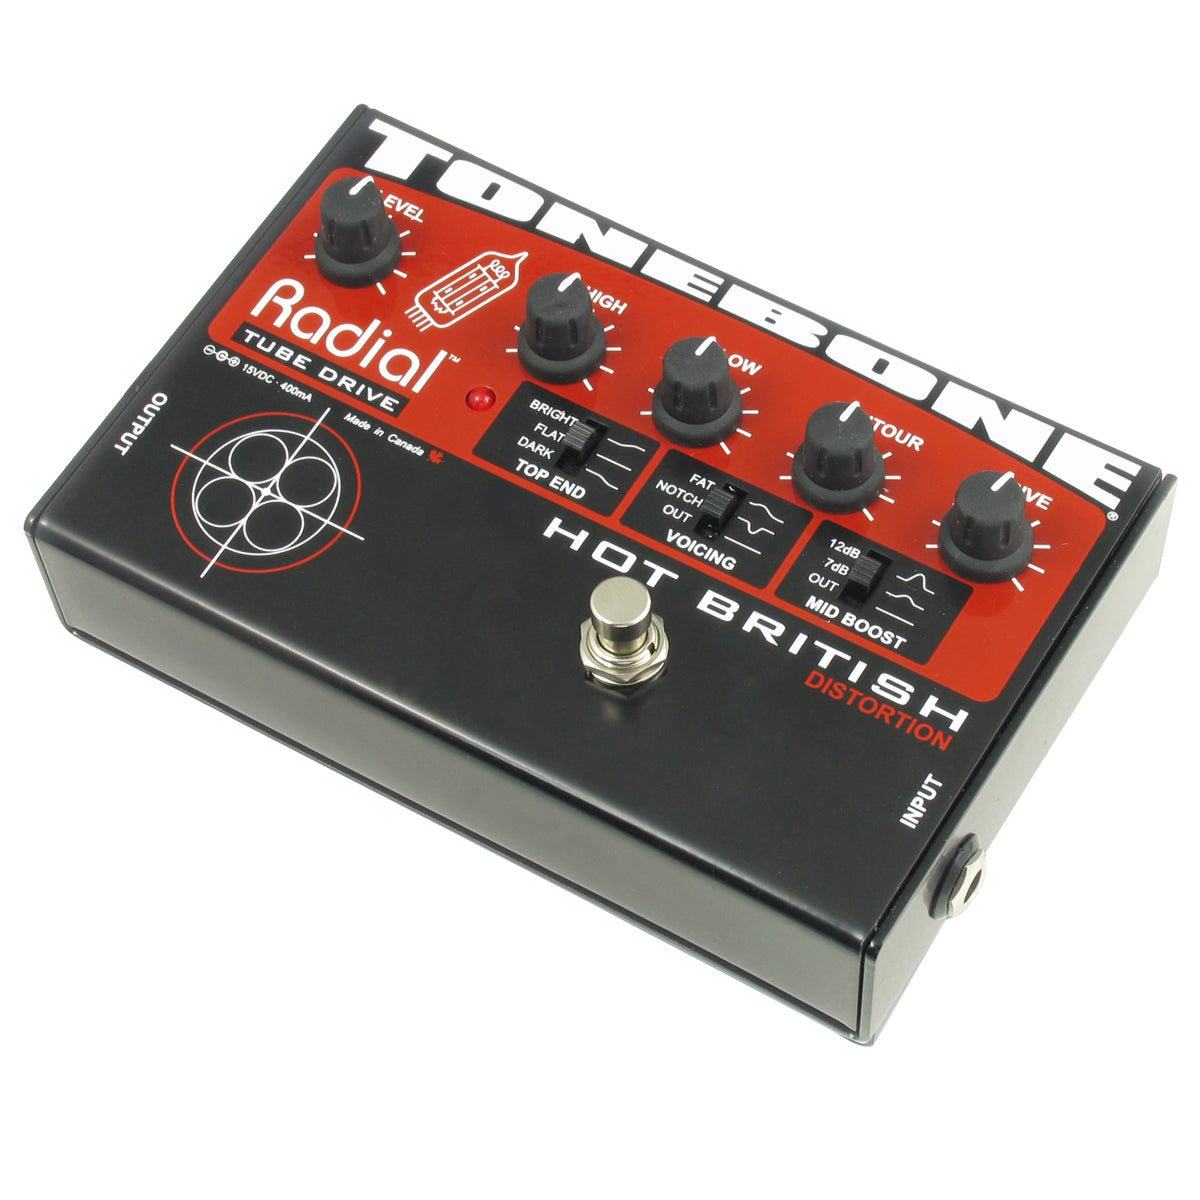 Radial Tonebone Hot British Tube distortion 12AX7 equipped British style tones. PSU included